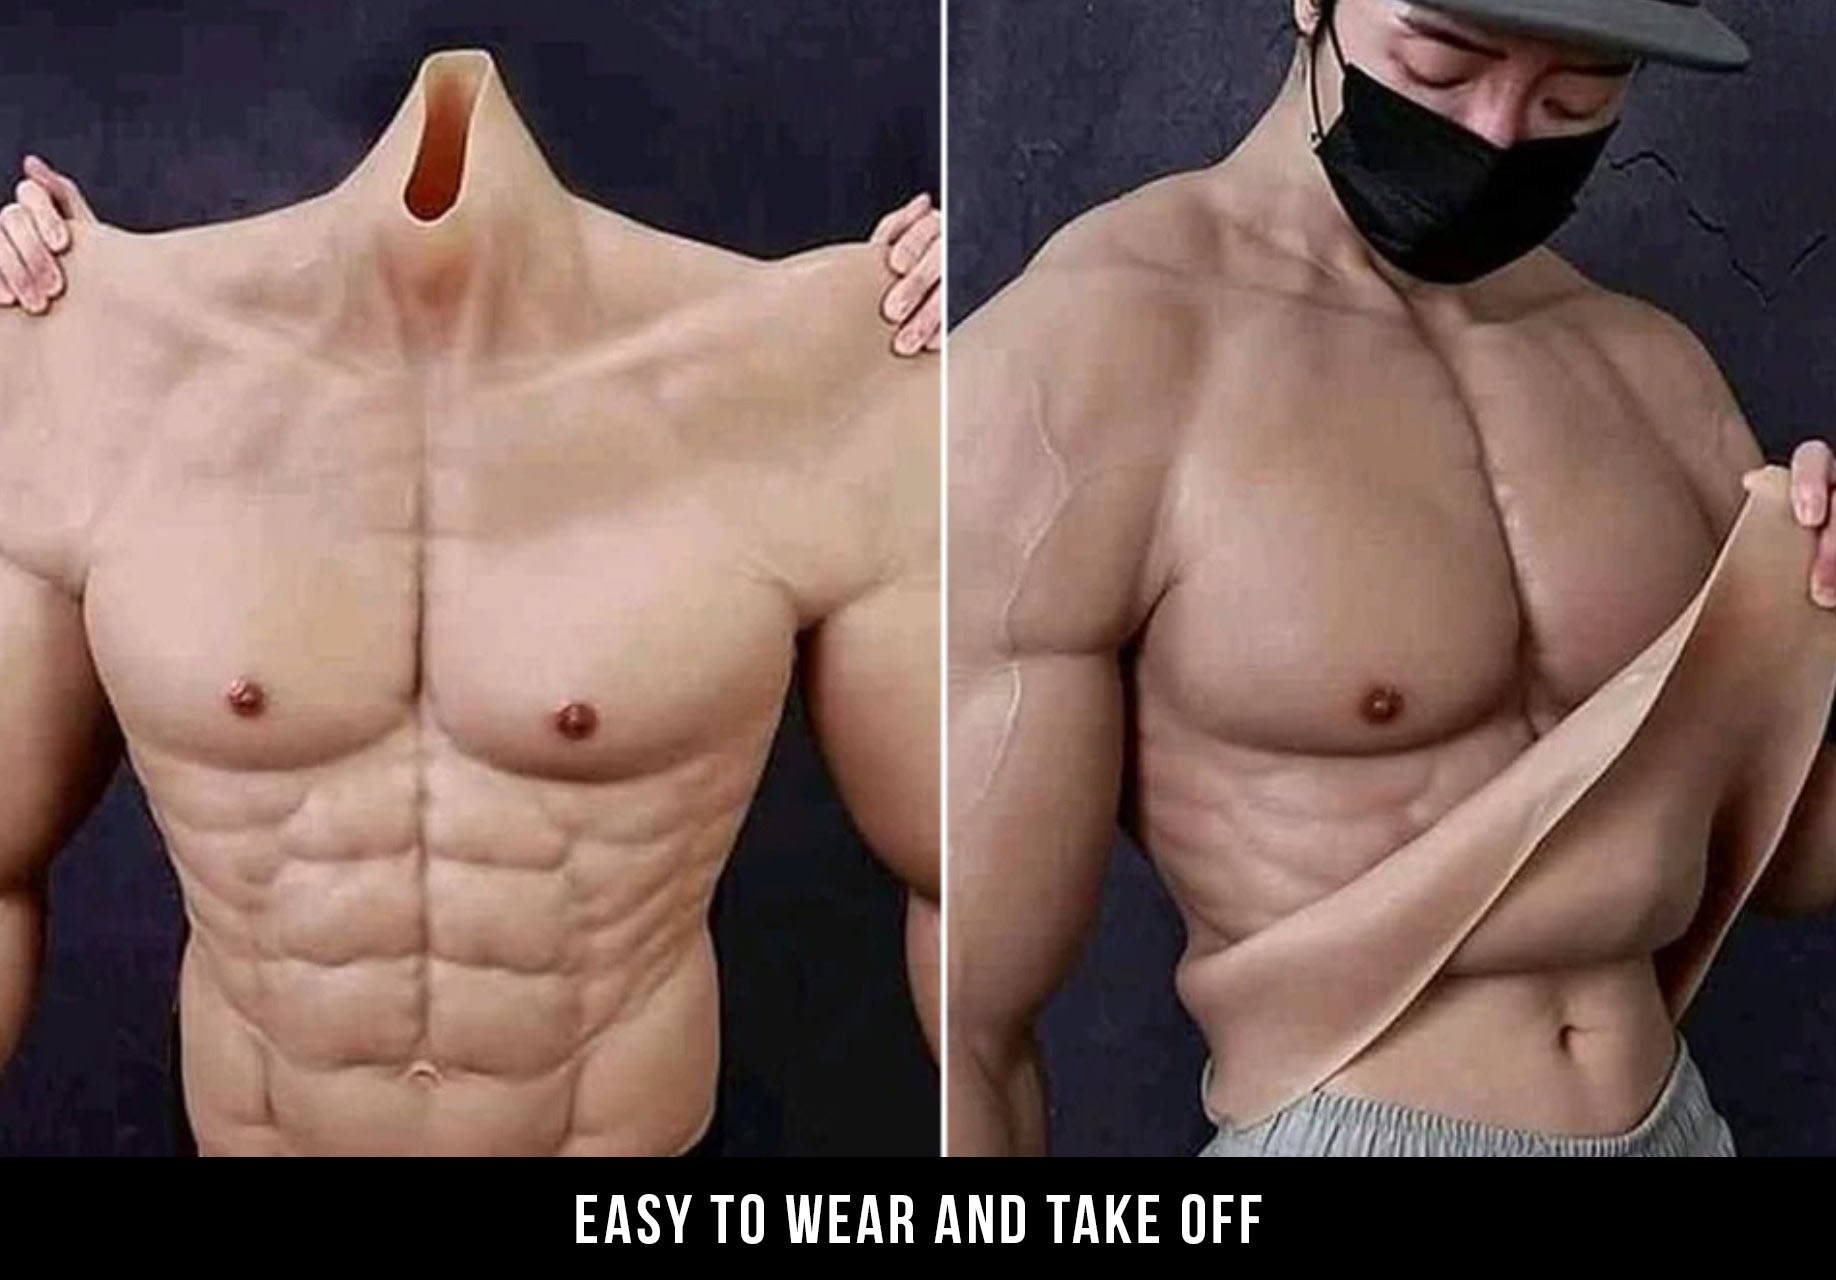 How to Wear a Suit if You're a Bodybuilder